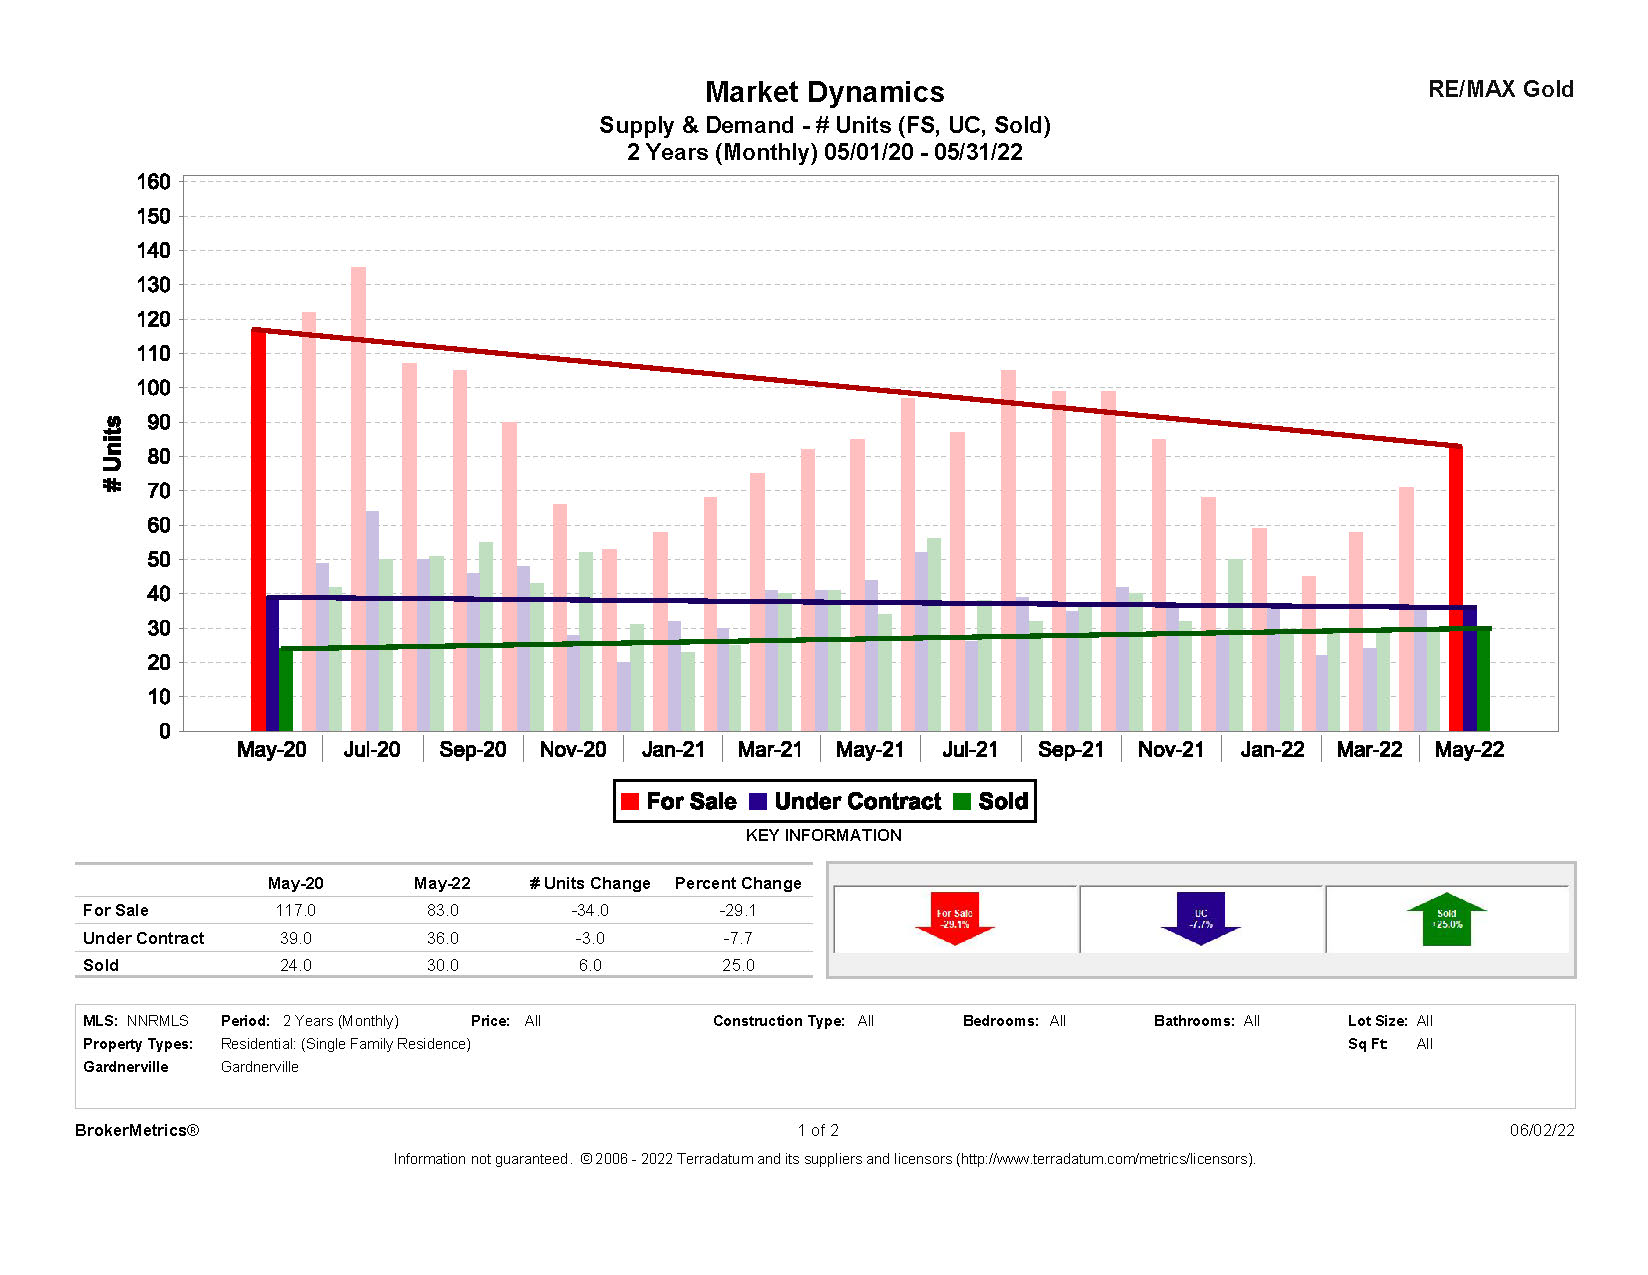 May 2022 Residential Stats: Supply & Demand graph for Gardnerville, NV